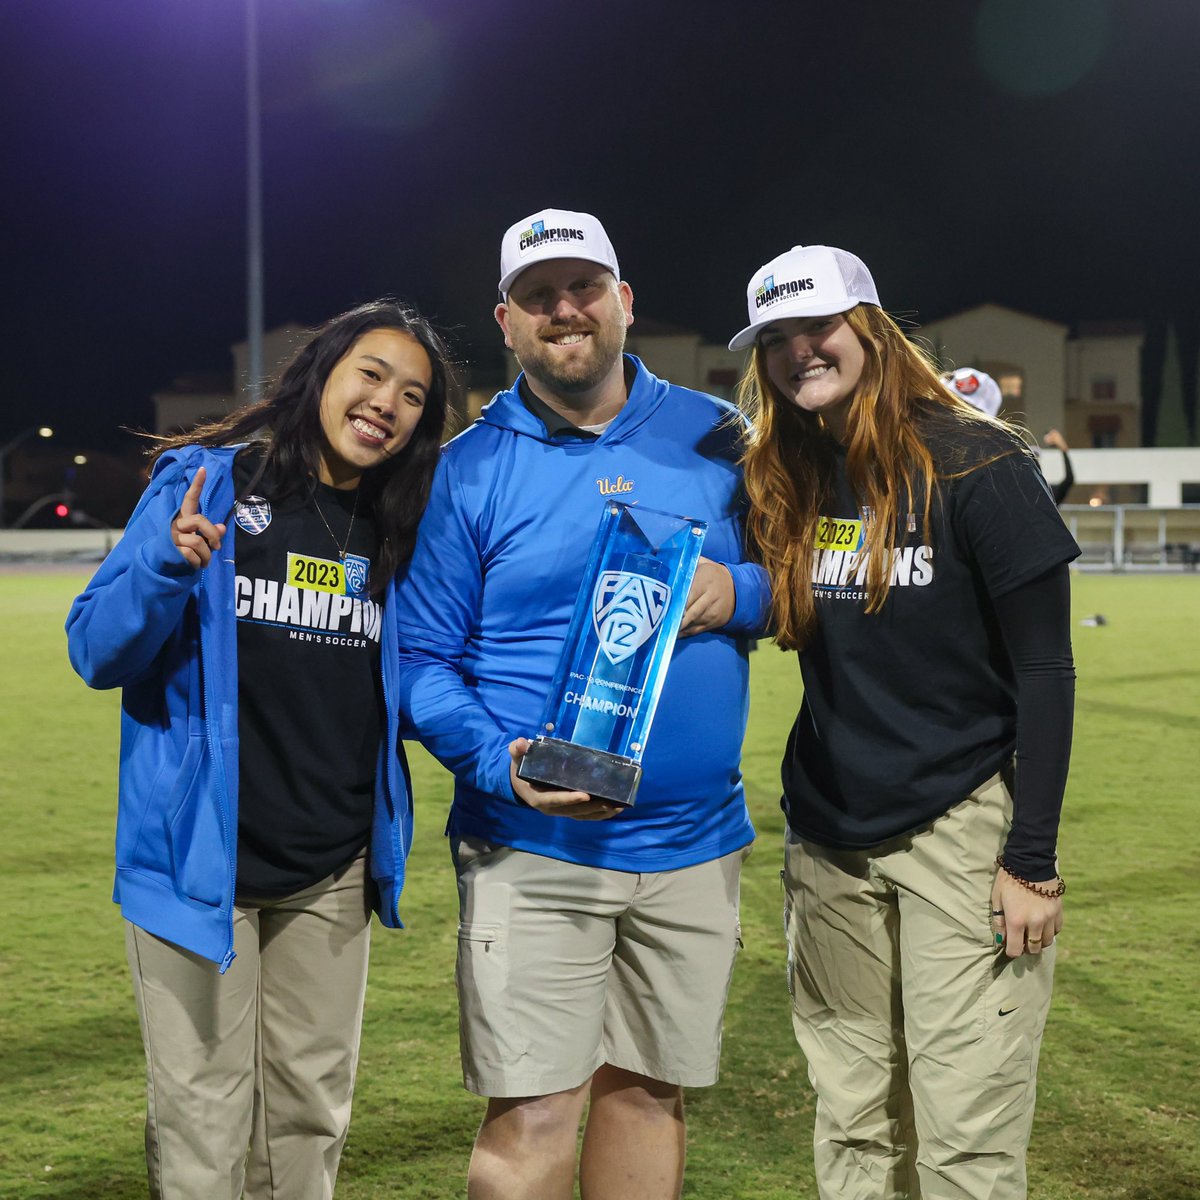 Happy National Athletic Training month to our crew! Thank you for everything you all do for our athletes. #GoBruins